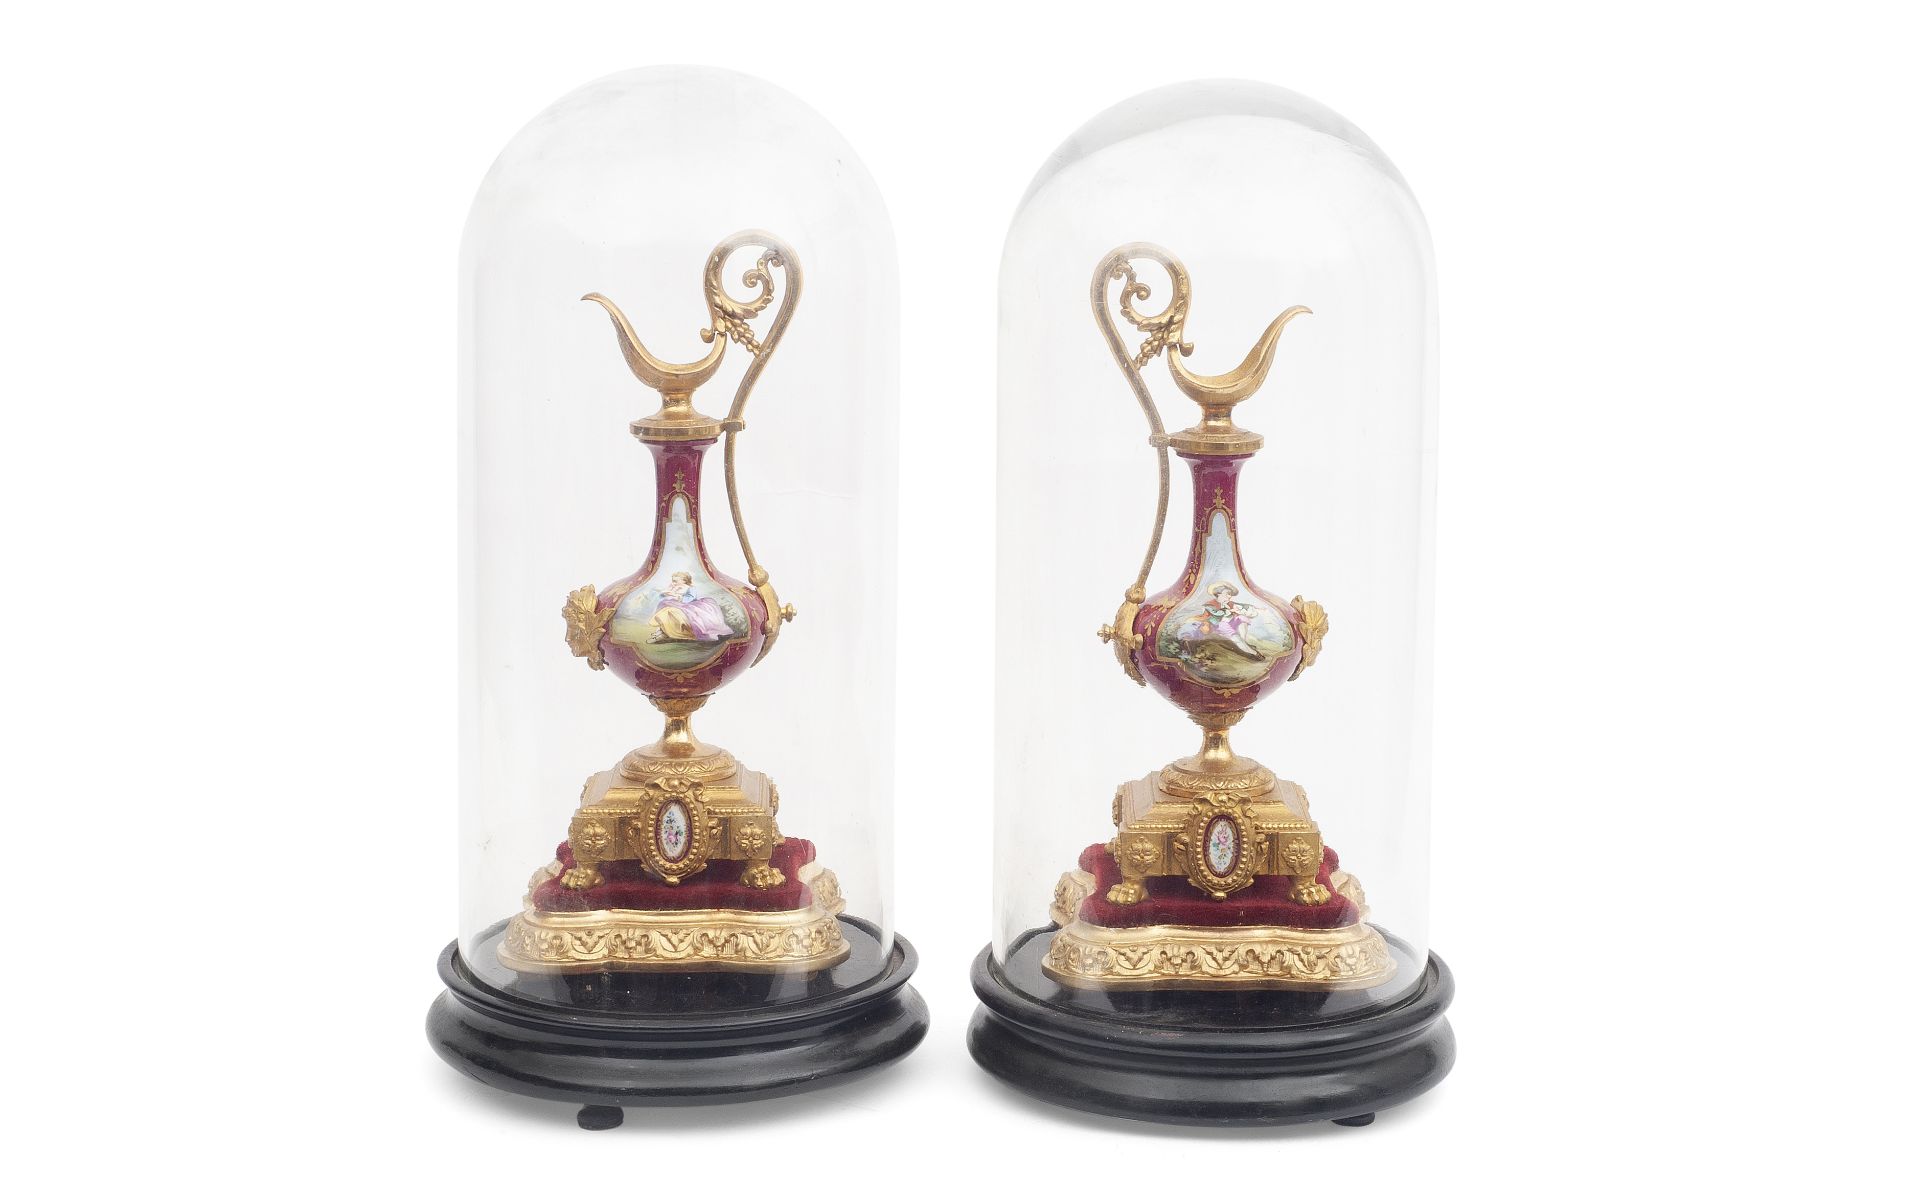 A PAIR OF GILT METAL AND PORCELAIN EWERS UNDER GLASS DOMES